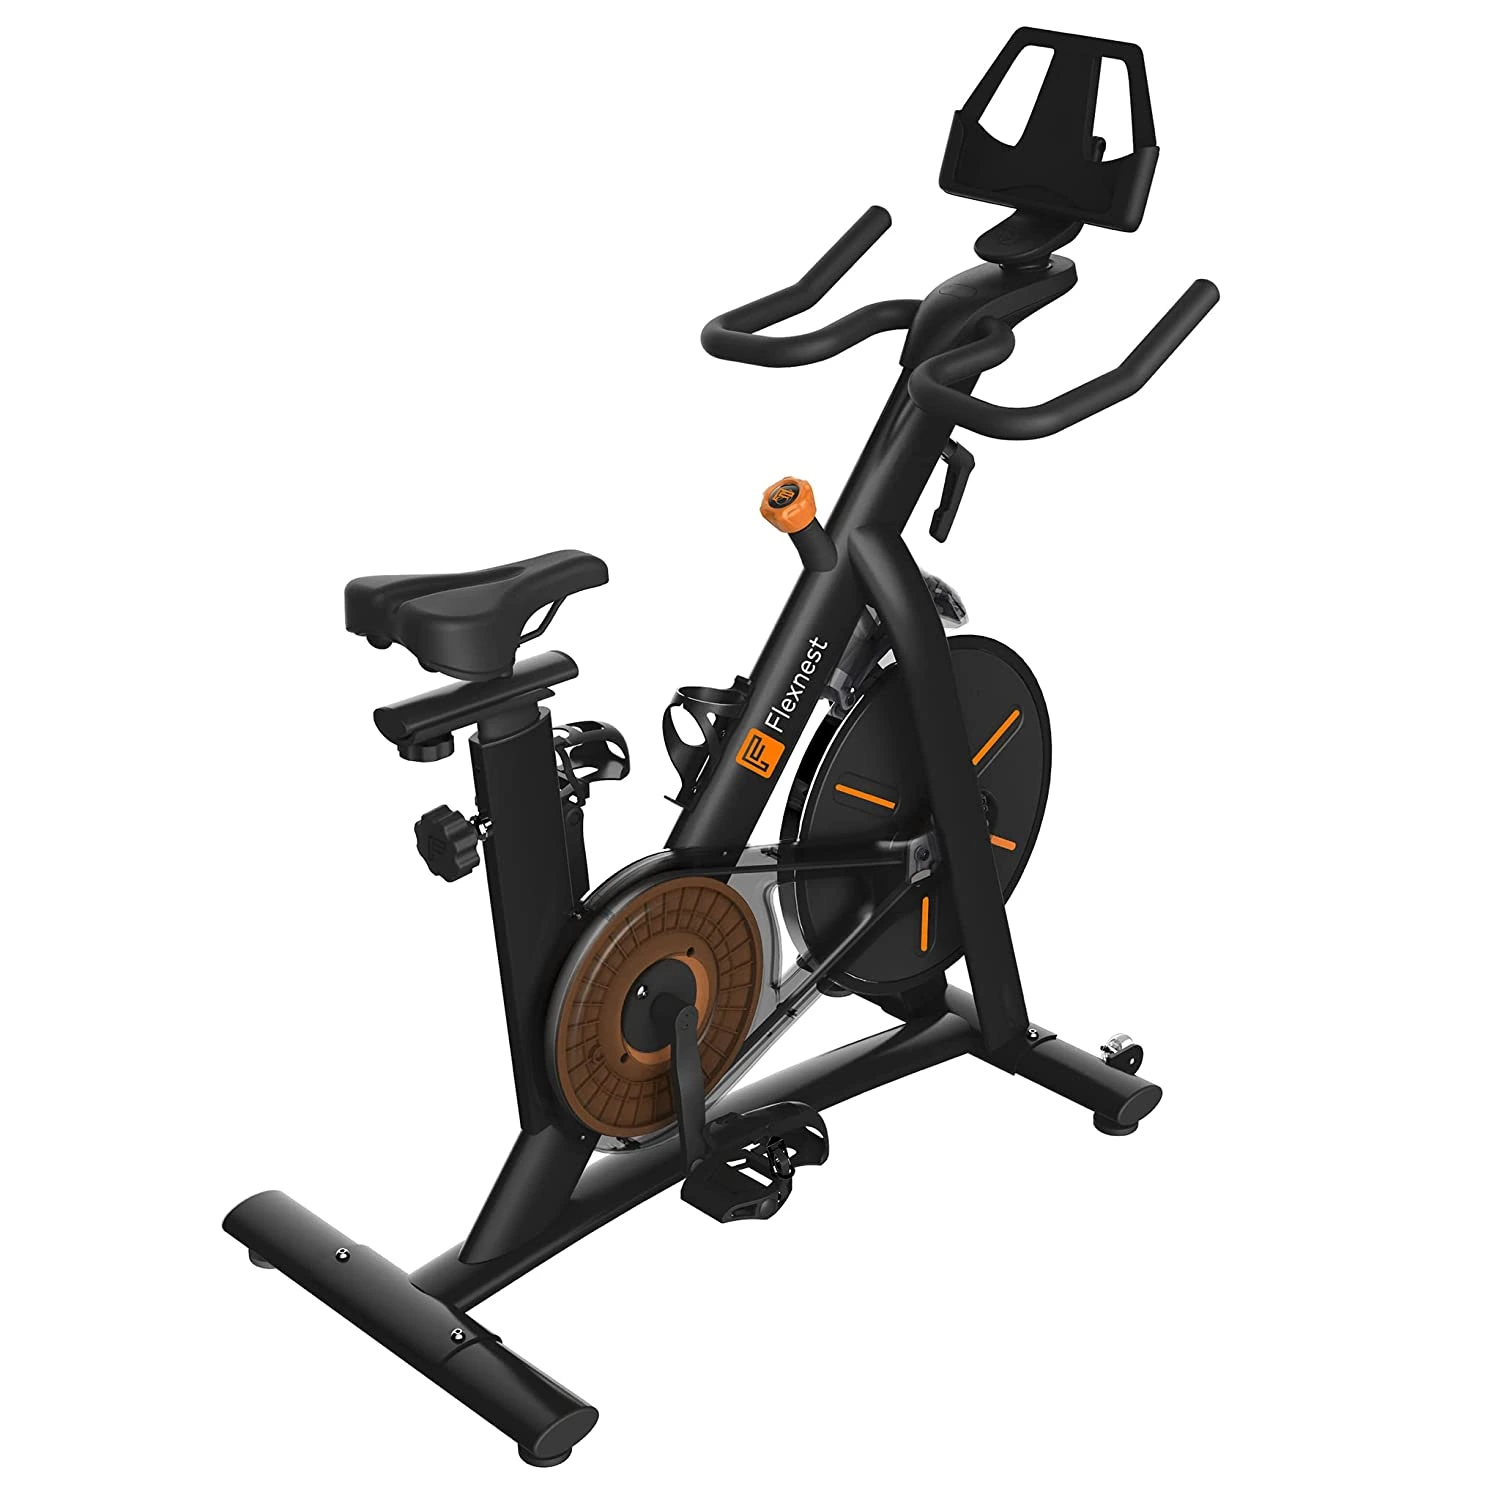 Flexnest flexbike review unbaised real from mensquats cardio equipment for home India